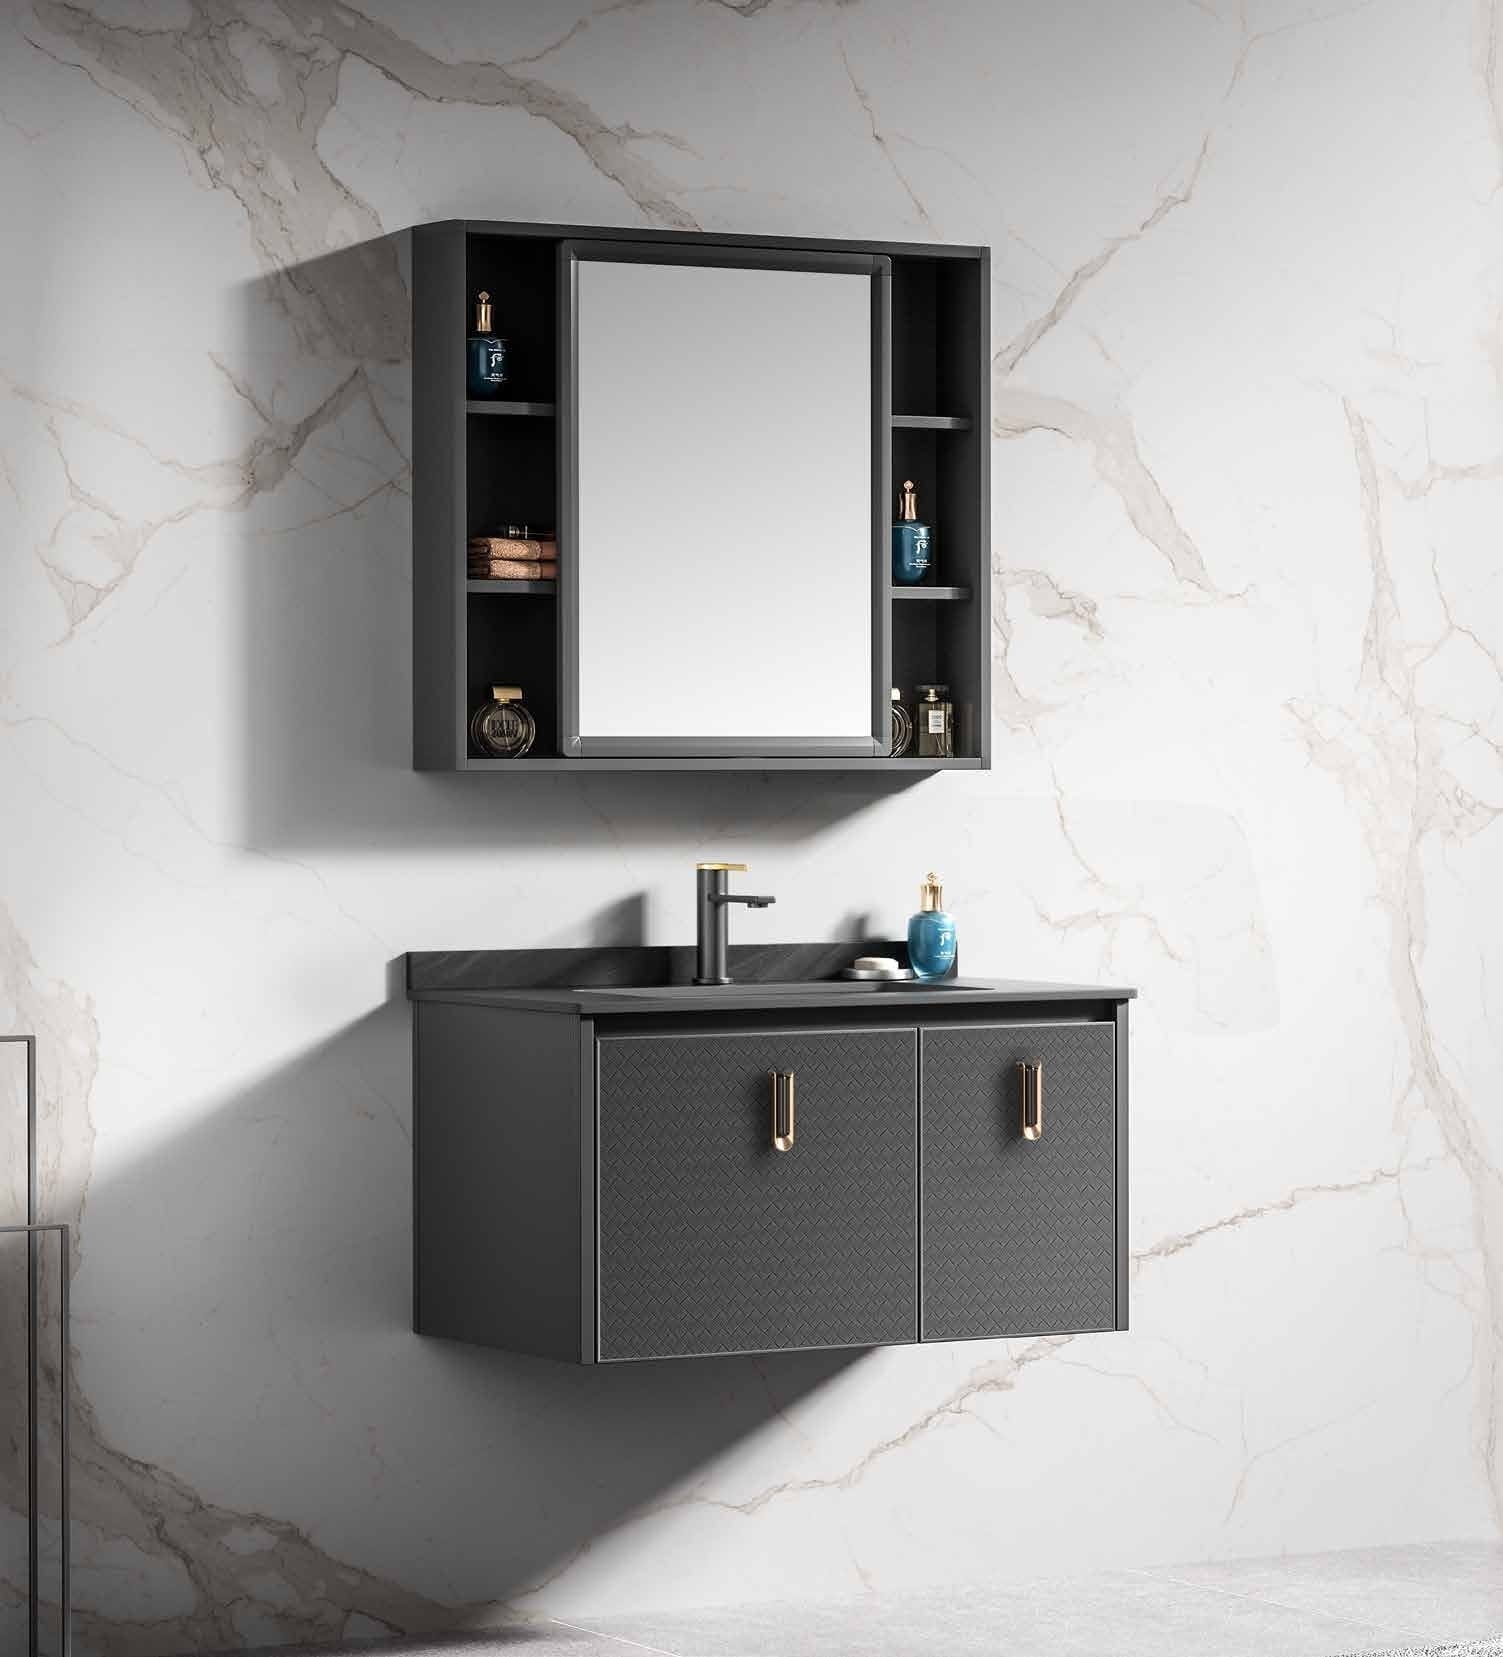 Buy Bathroom Luxury 60cm Wall-Mounted Vanity Cabinet with Mirror - WK-K-9631 | Shop at Supply Master Accra, Ghana Bathroom Vanity & Cabinets Buy Tools hardware Building materials